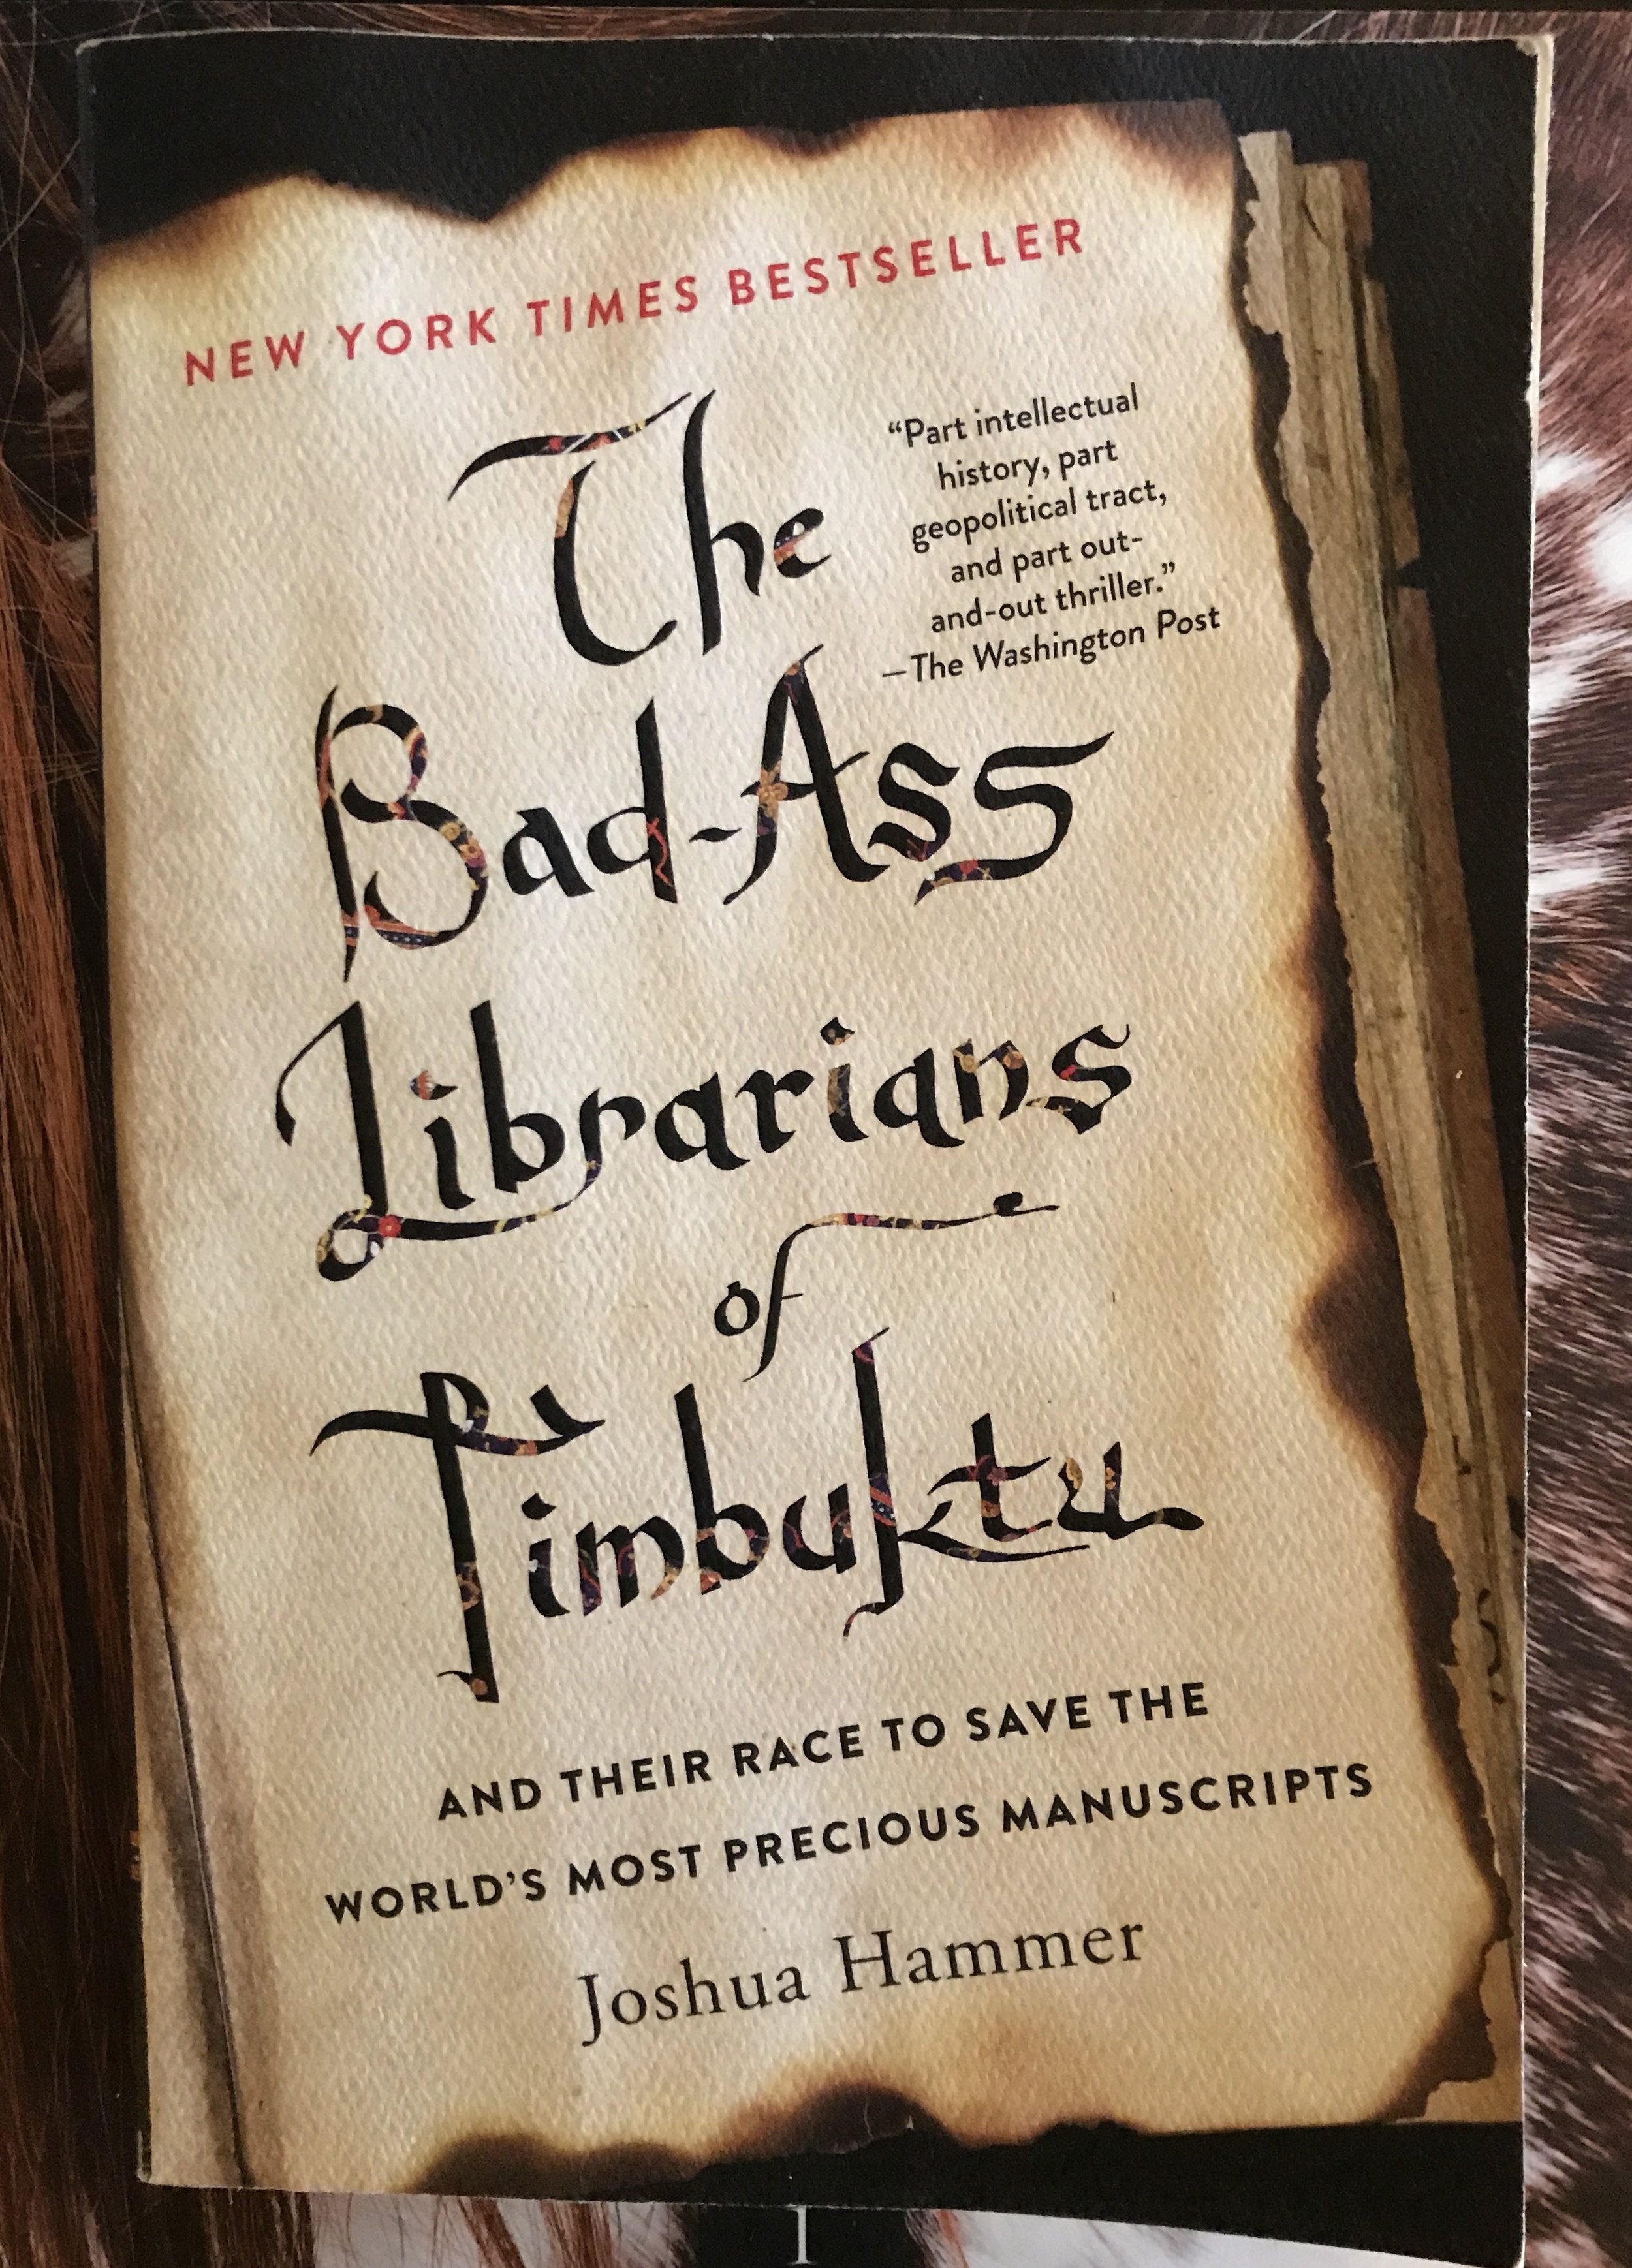 And Their Race to Save the World's Most Precious Manuscripts The Bad-Ass Librarians of Timbuktu